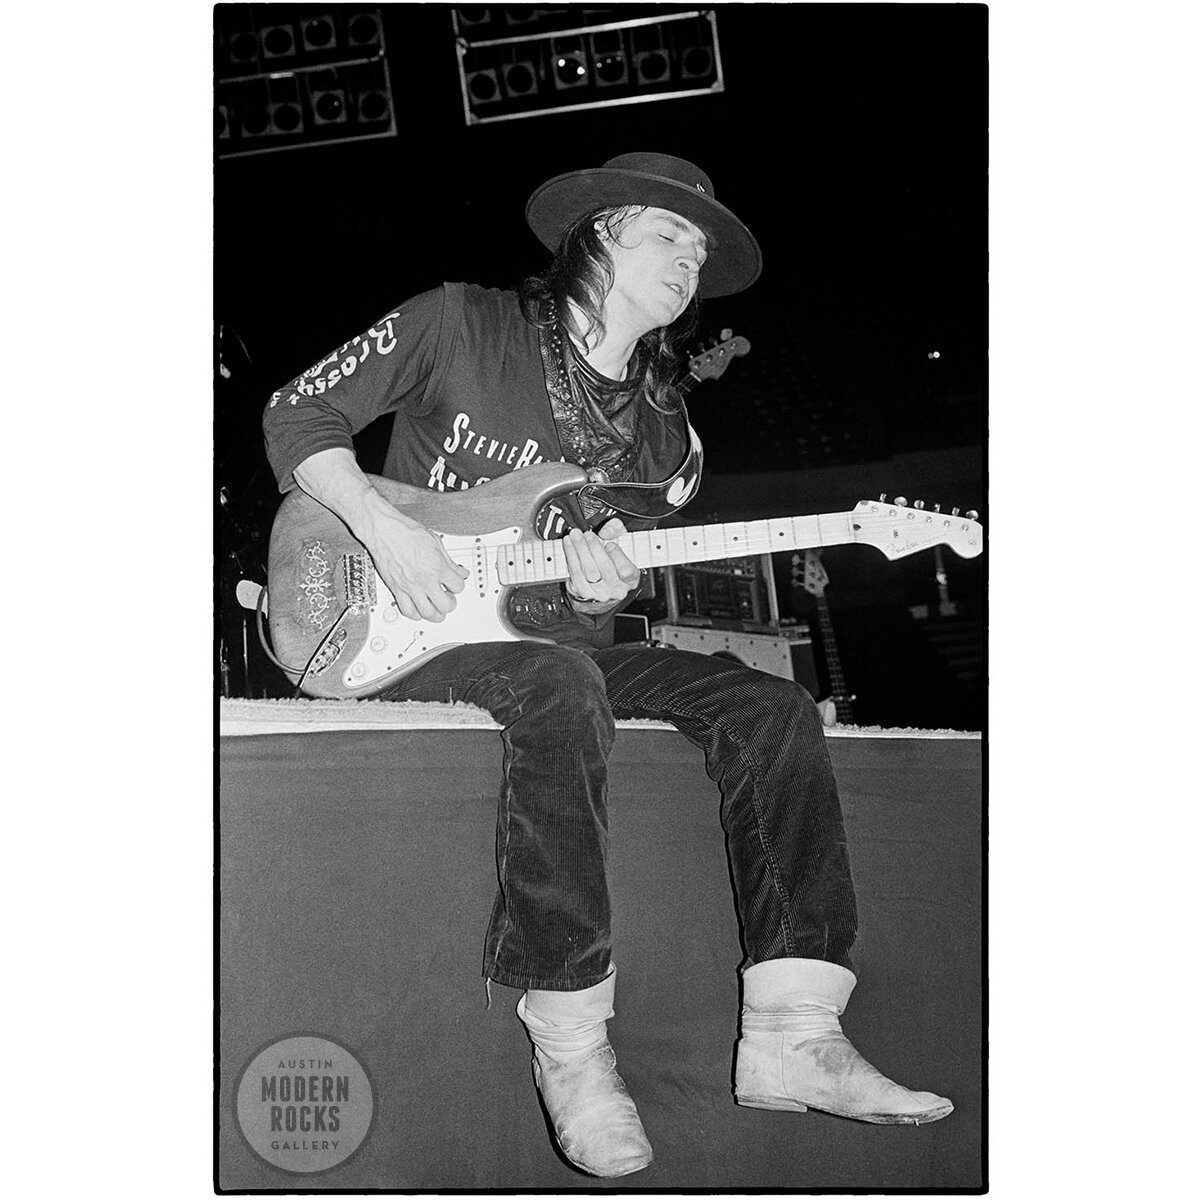 Stevie Ray Vaughan by Charlyn Zlotnik — Buy Signed Limited Edition Prints